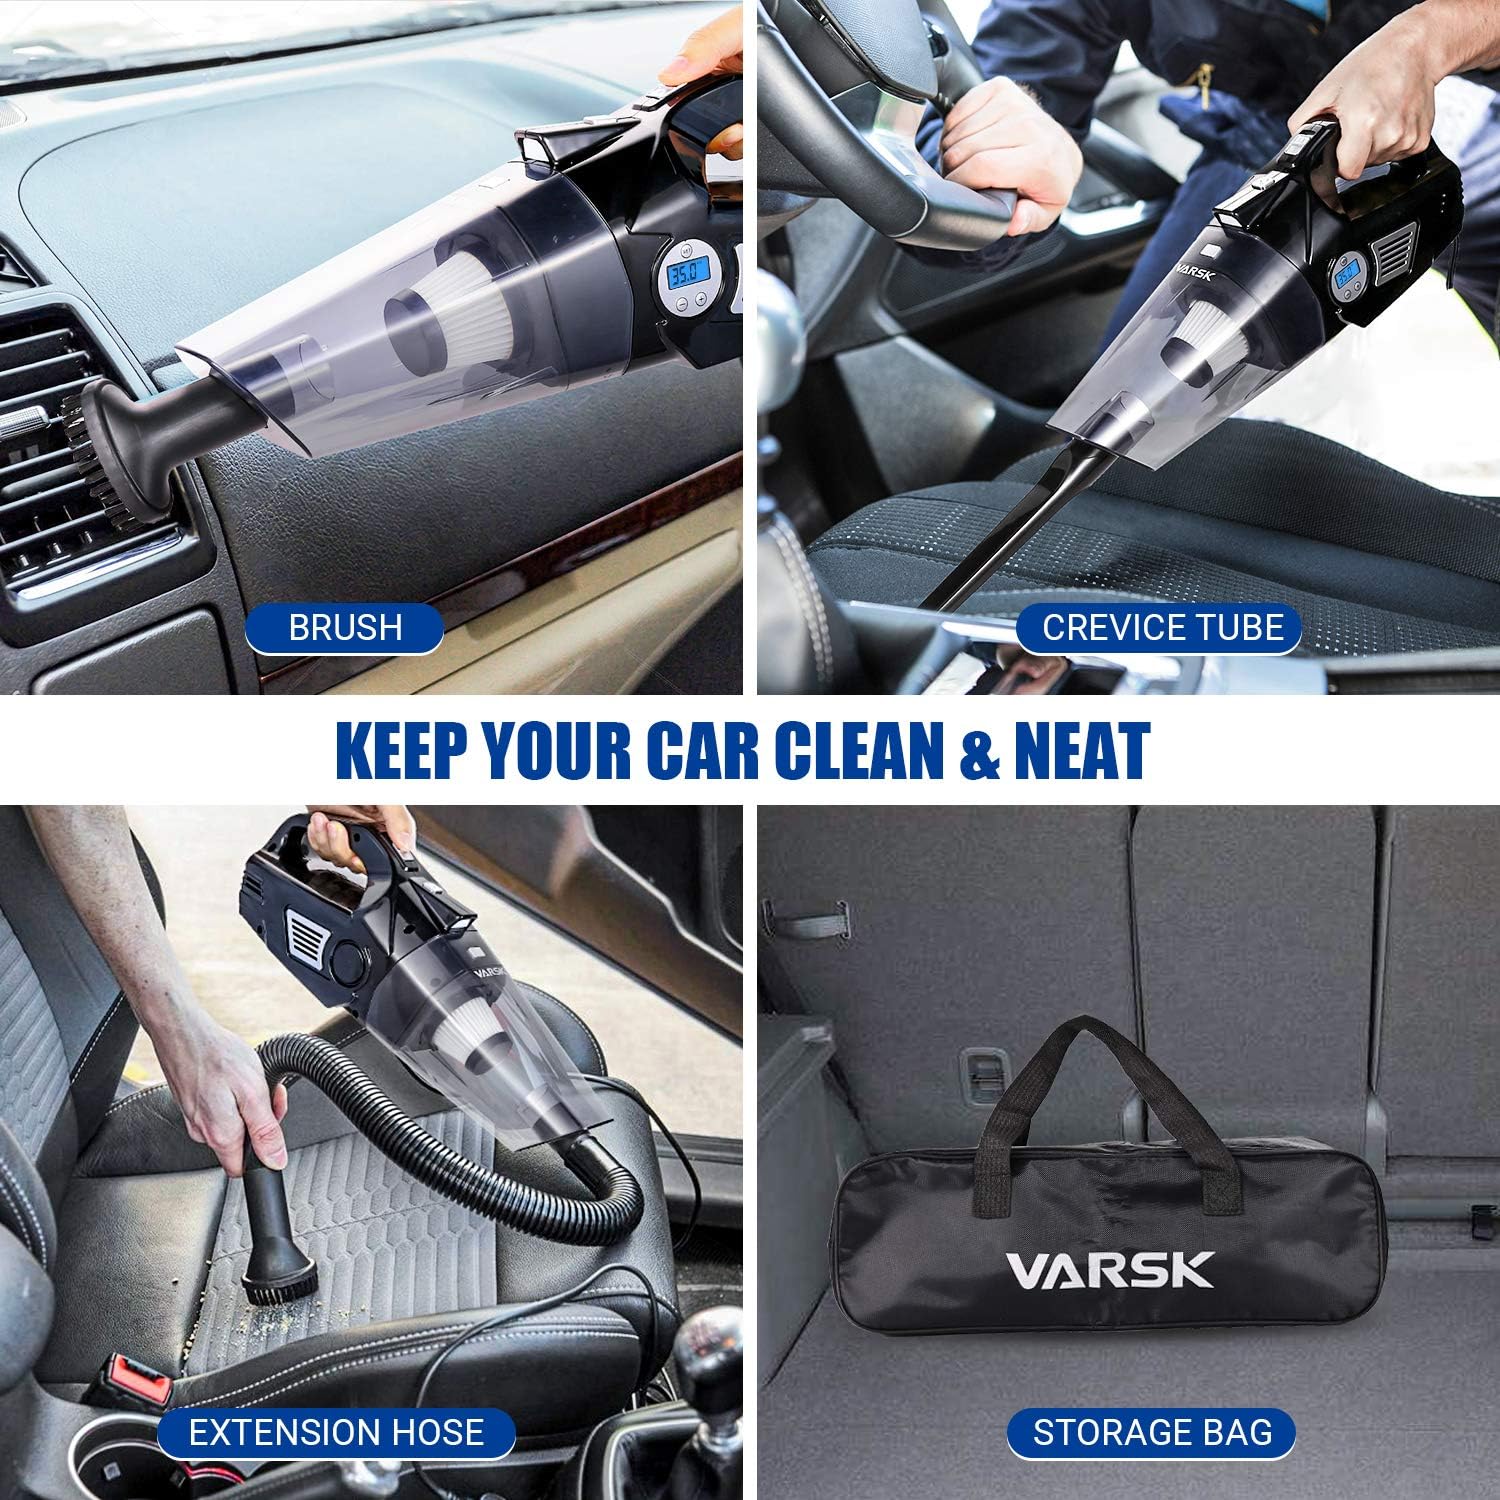 VARSK 4-in-1 Car Vacuum Cleaner, Tire Inflator Portable Air Compressor with Digital Tire Pressure Gauge LCD Display and LED Light, 12